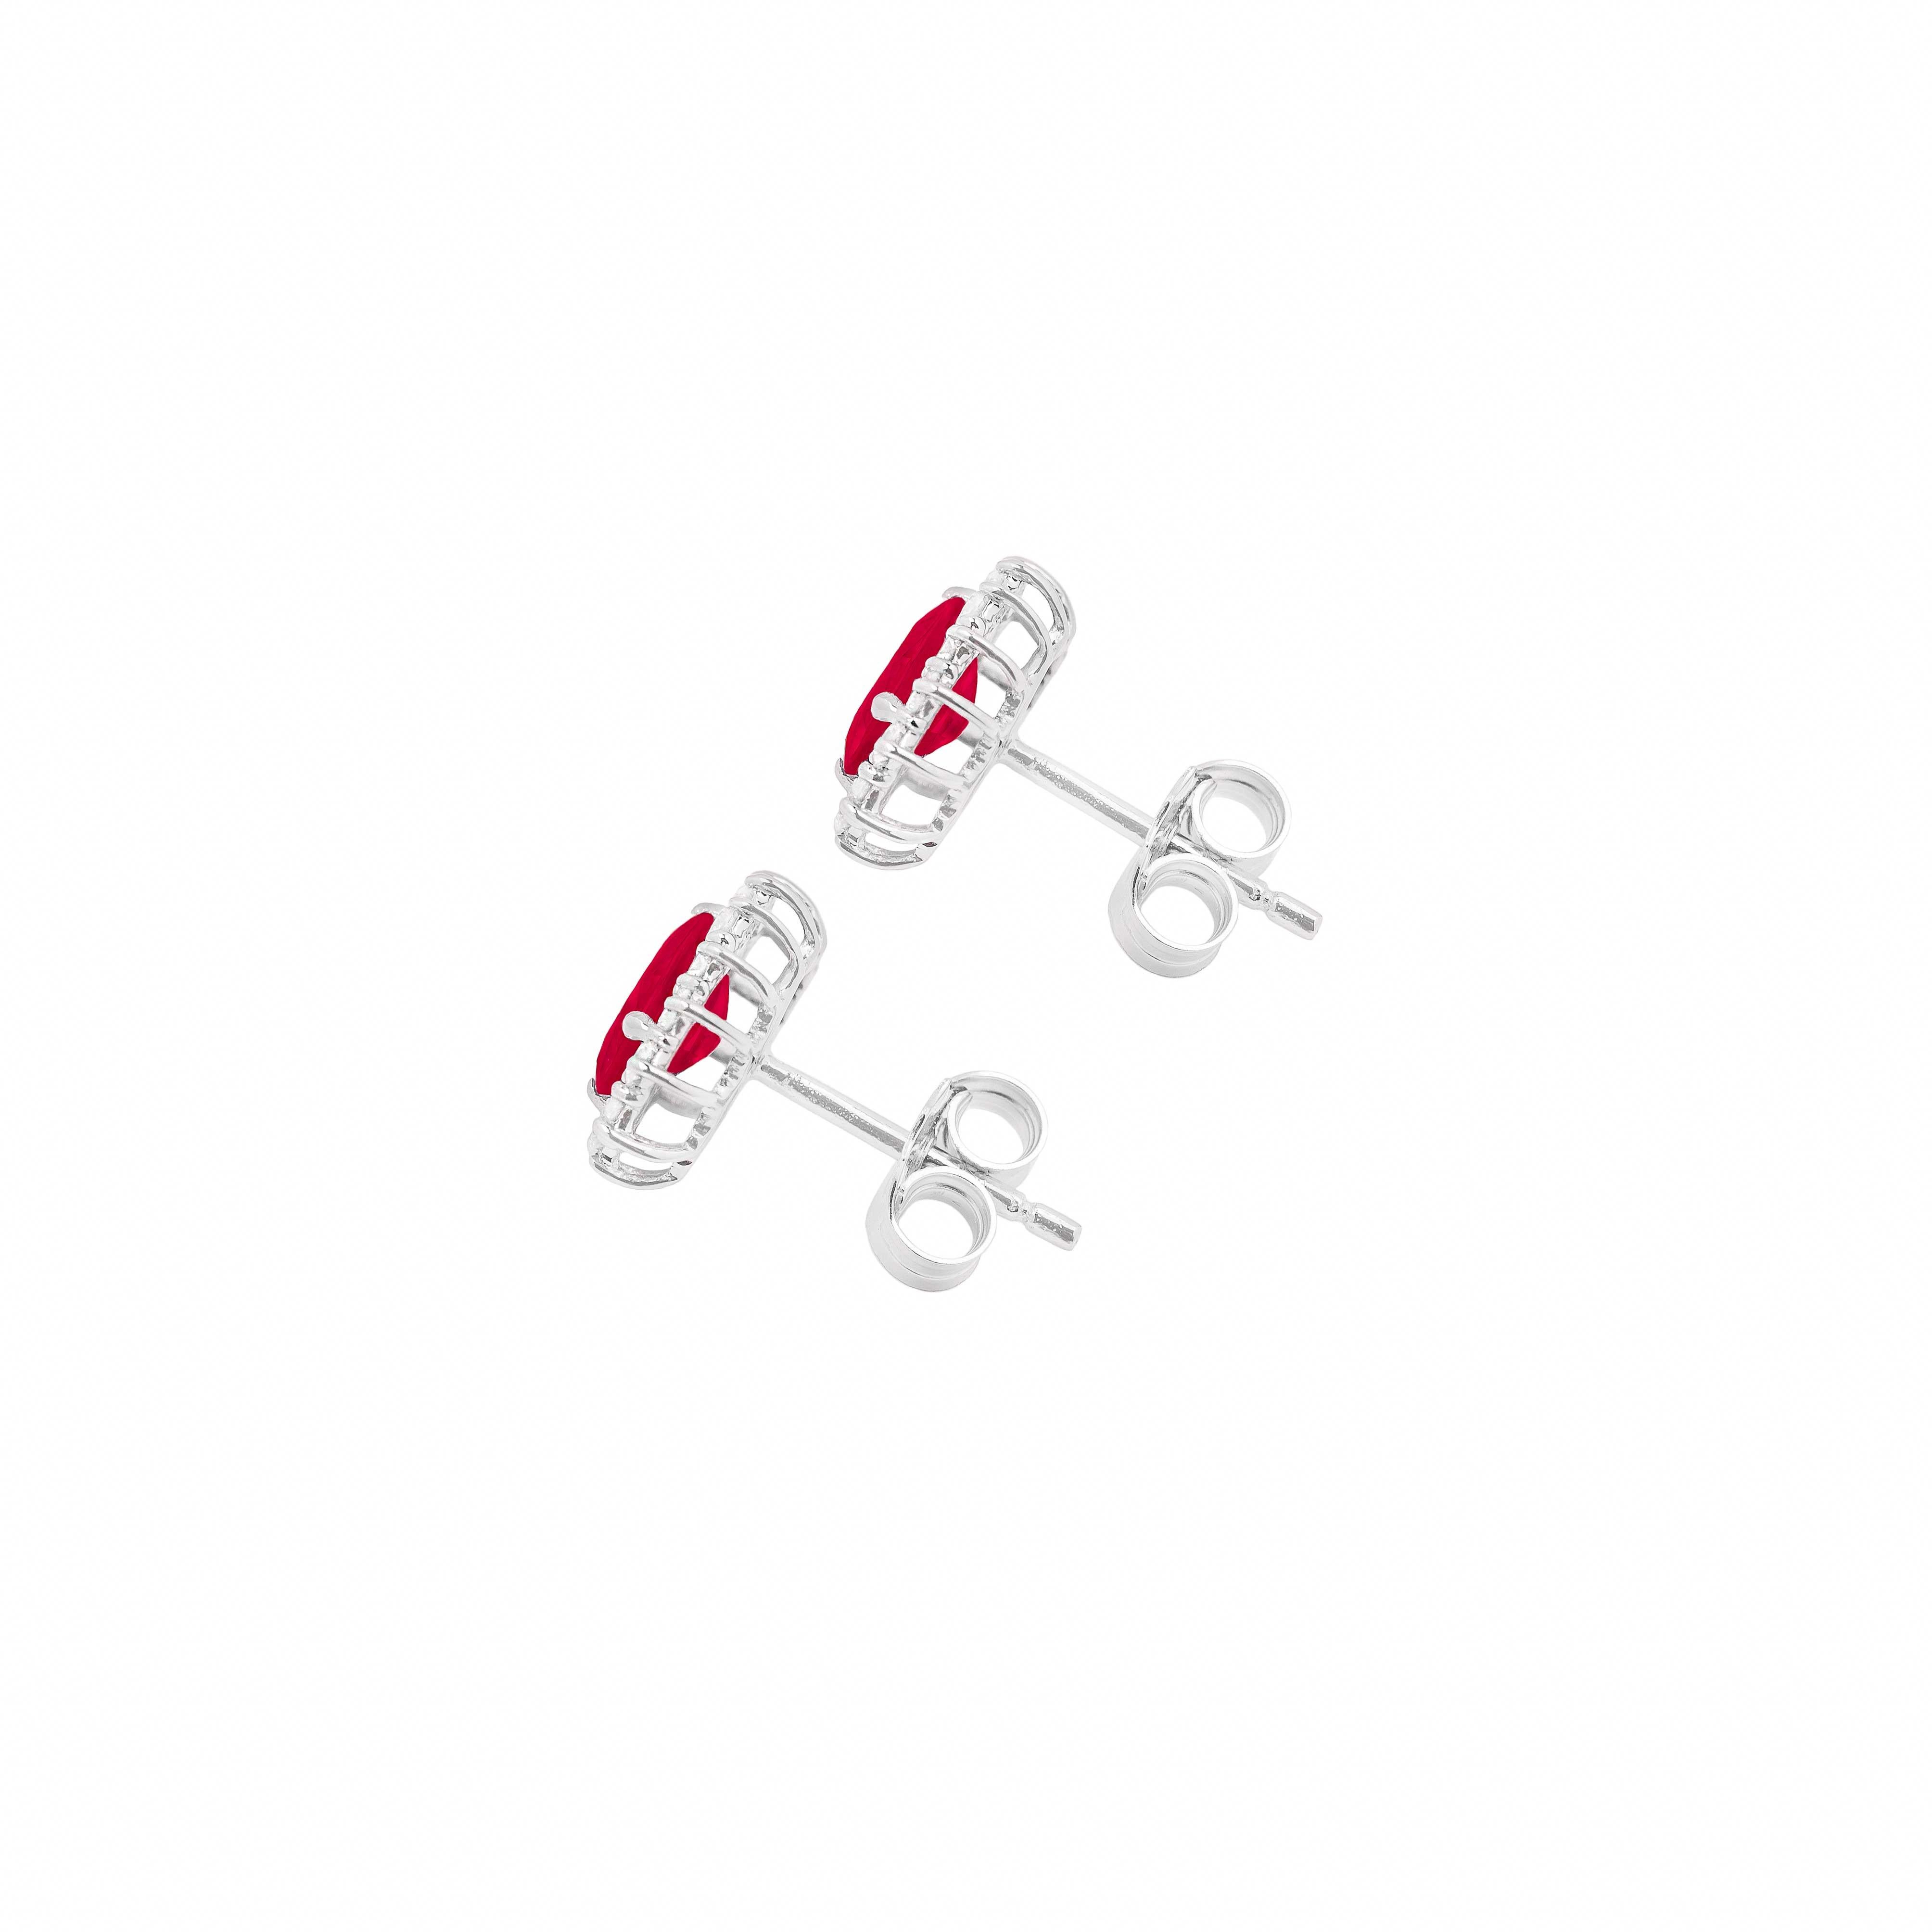 Contemporary 18k White Gold, Diamonds and Rubies Stud Earrings